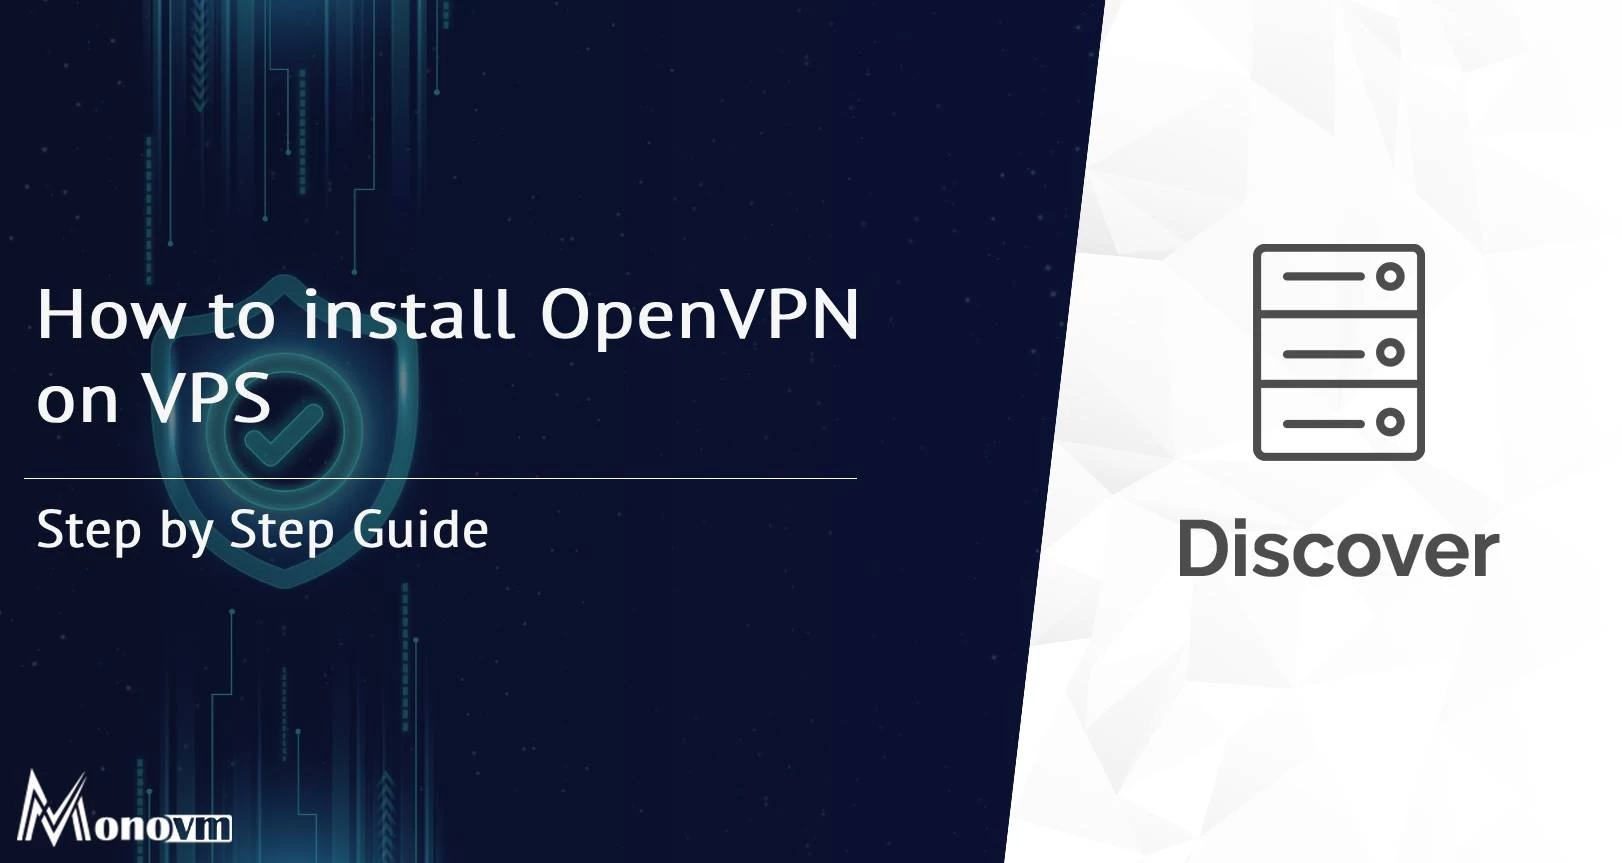 How to install OpenVPN on VPS?